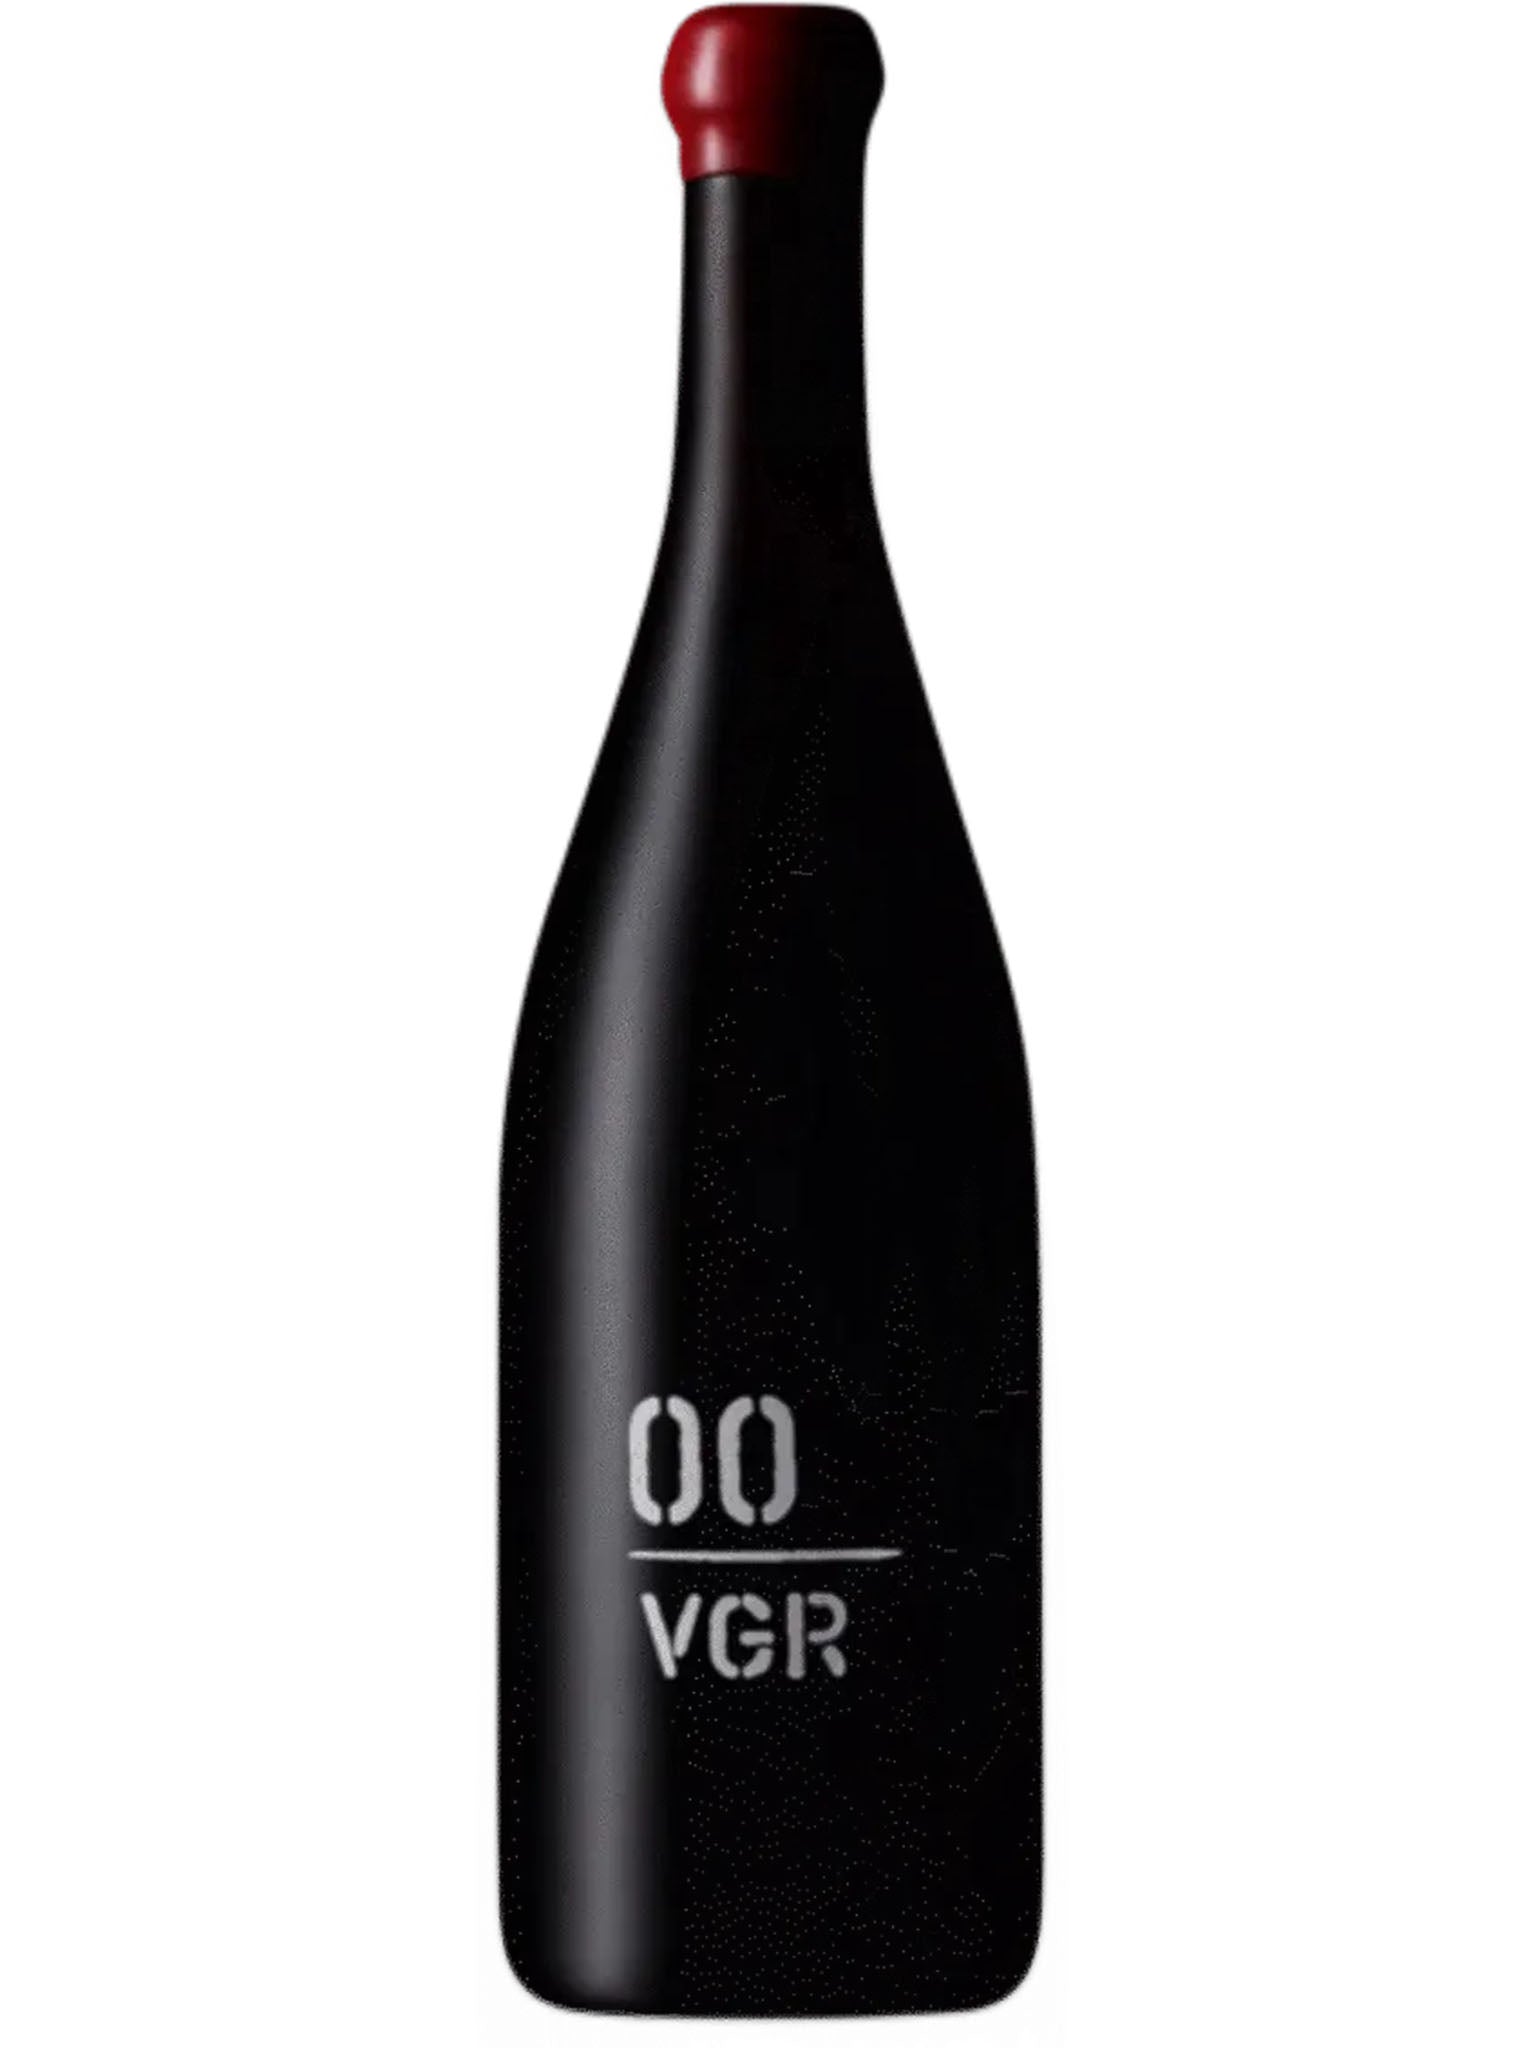 00 Wines VGR Pinot Noir 12pk 2021 - Very Limited/Allocation only - Sold Out